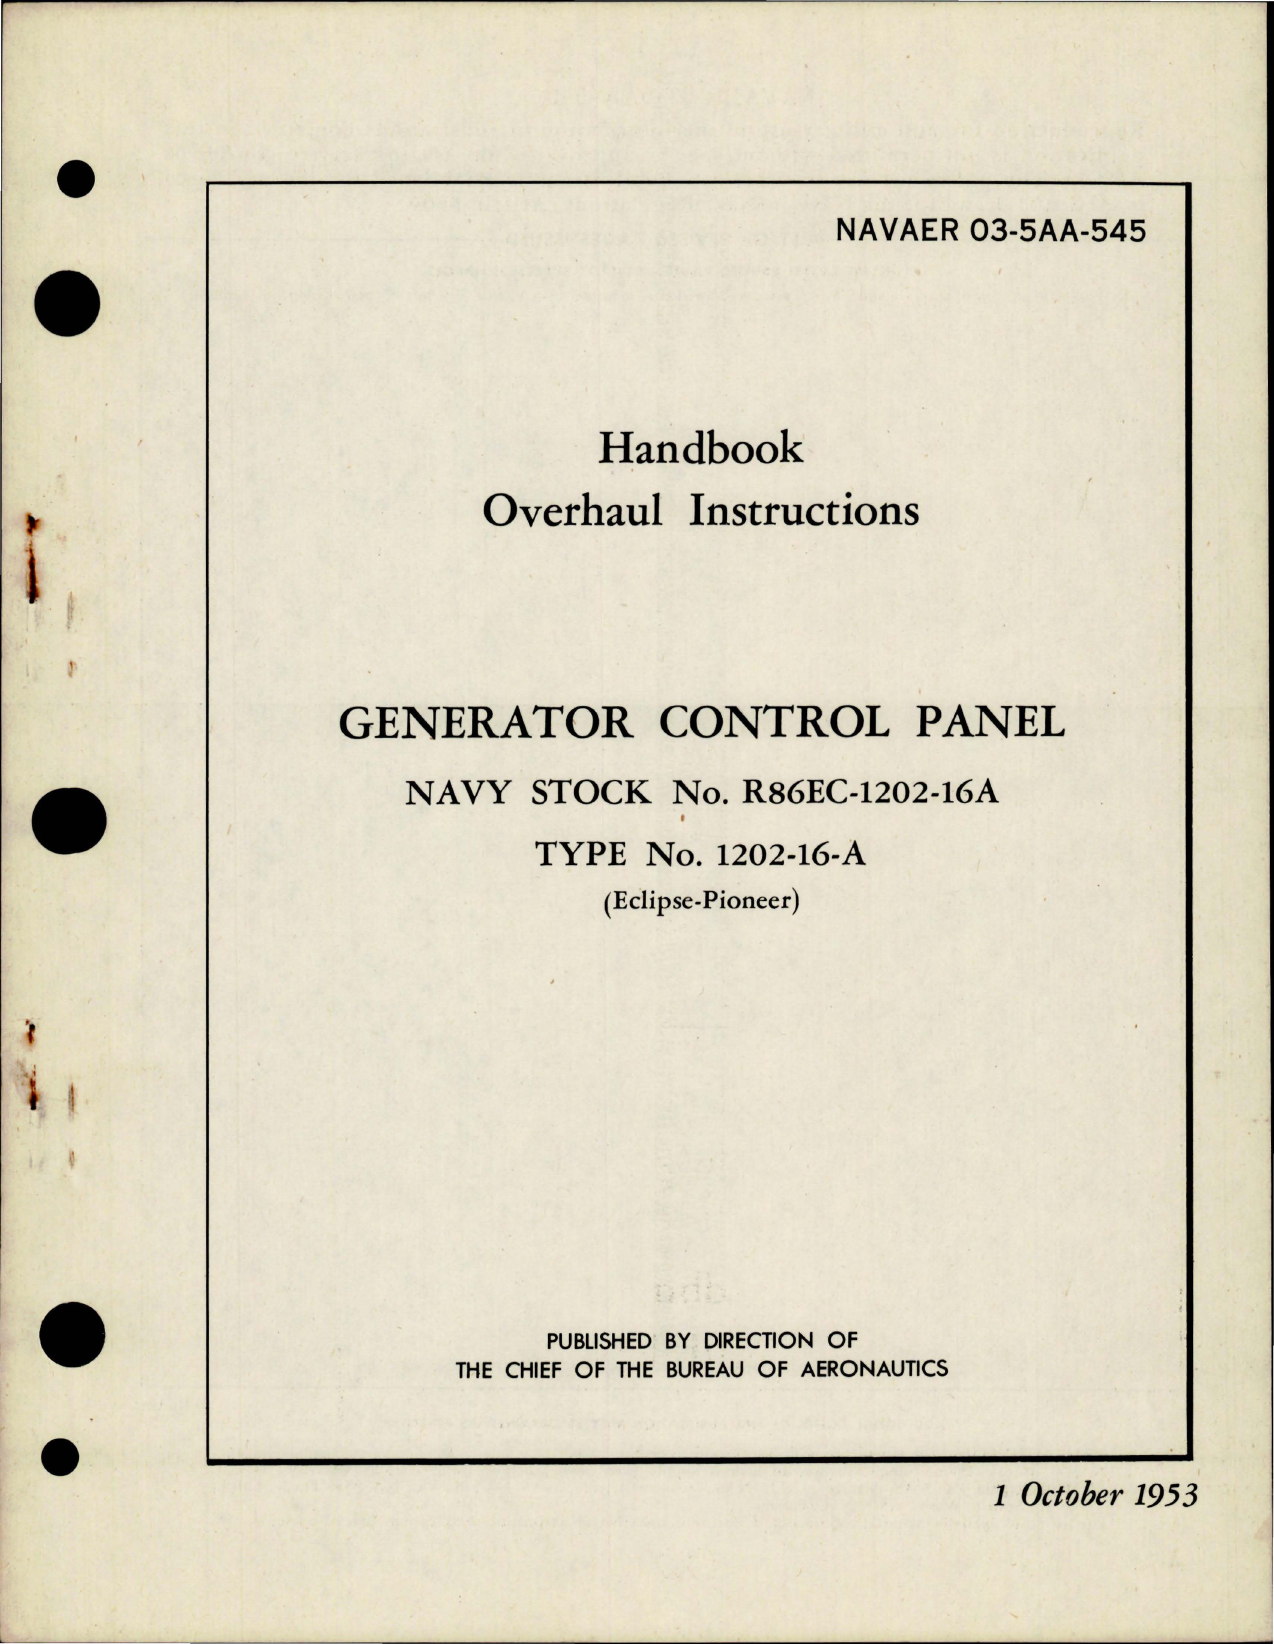 Sample page 1 from AirCorps Library document: Overhaul Instructions for Generator Control Panel - Type 1202-16-A